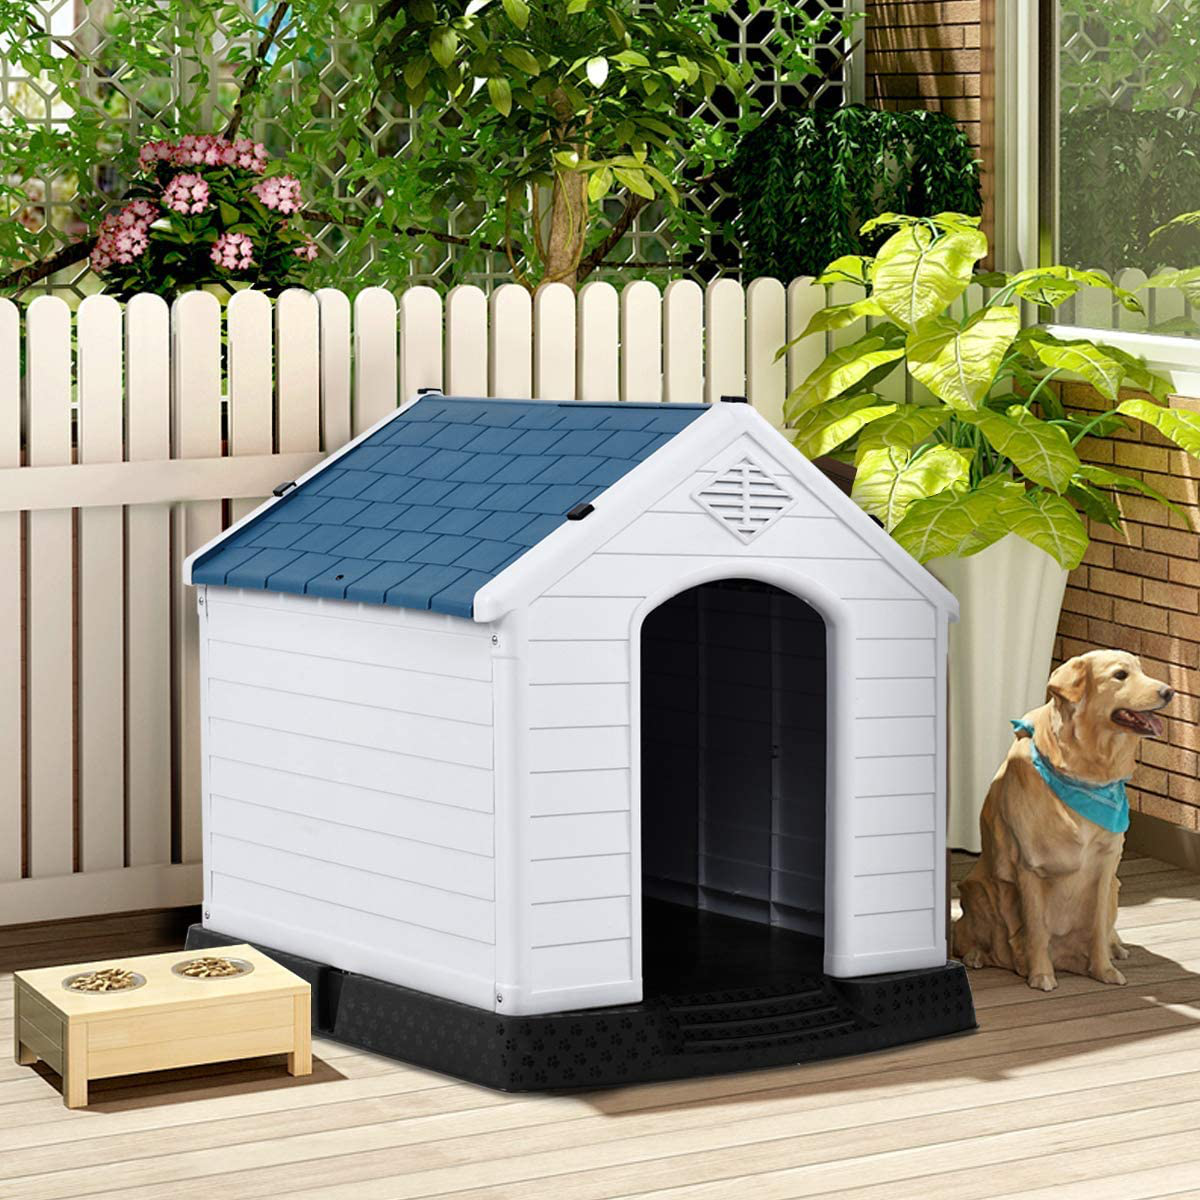 PETSITE Plastic Dog House for Large Medium Small Dogs, Waterproof Outdoor Indoor Puppy Shelter Kennel with Air Vents and Elevated Floor